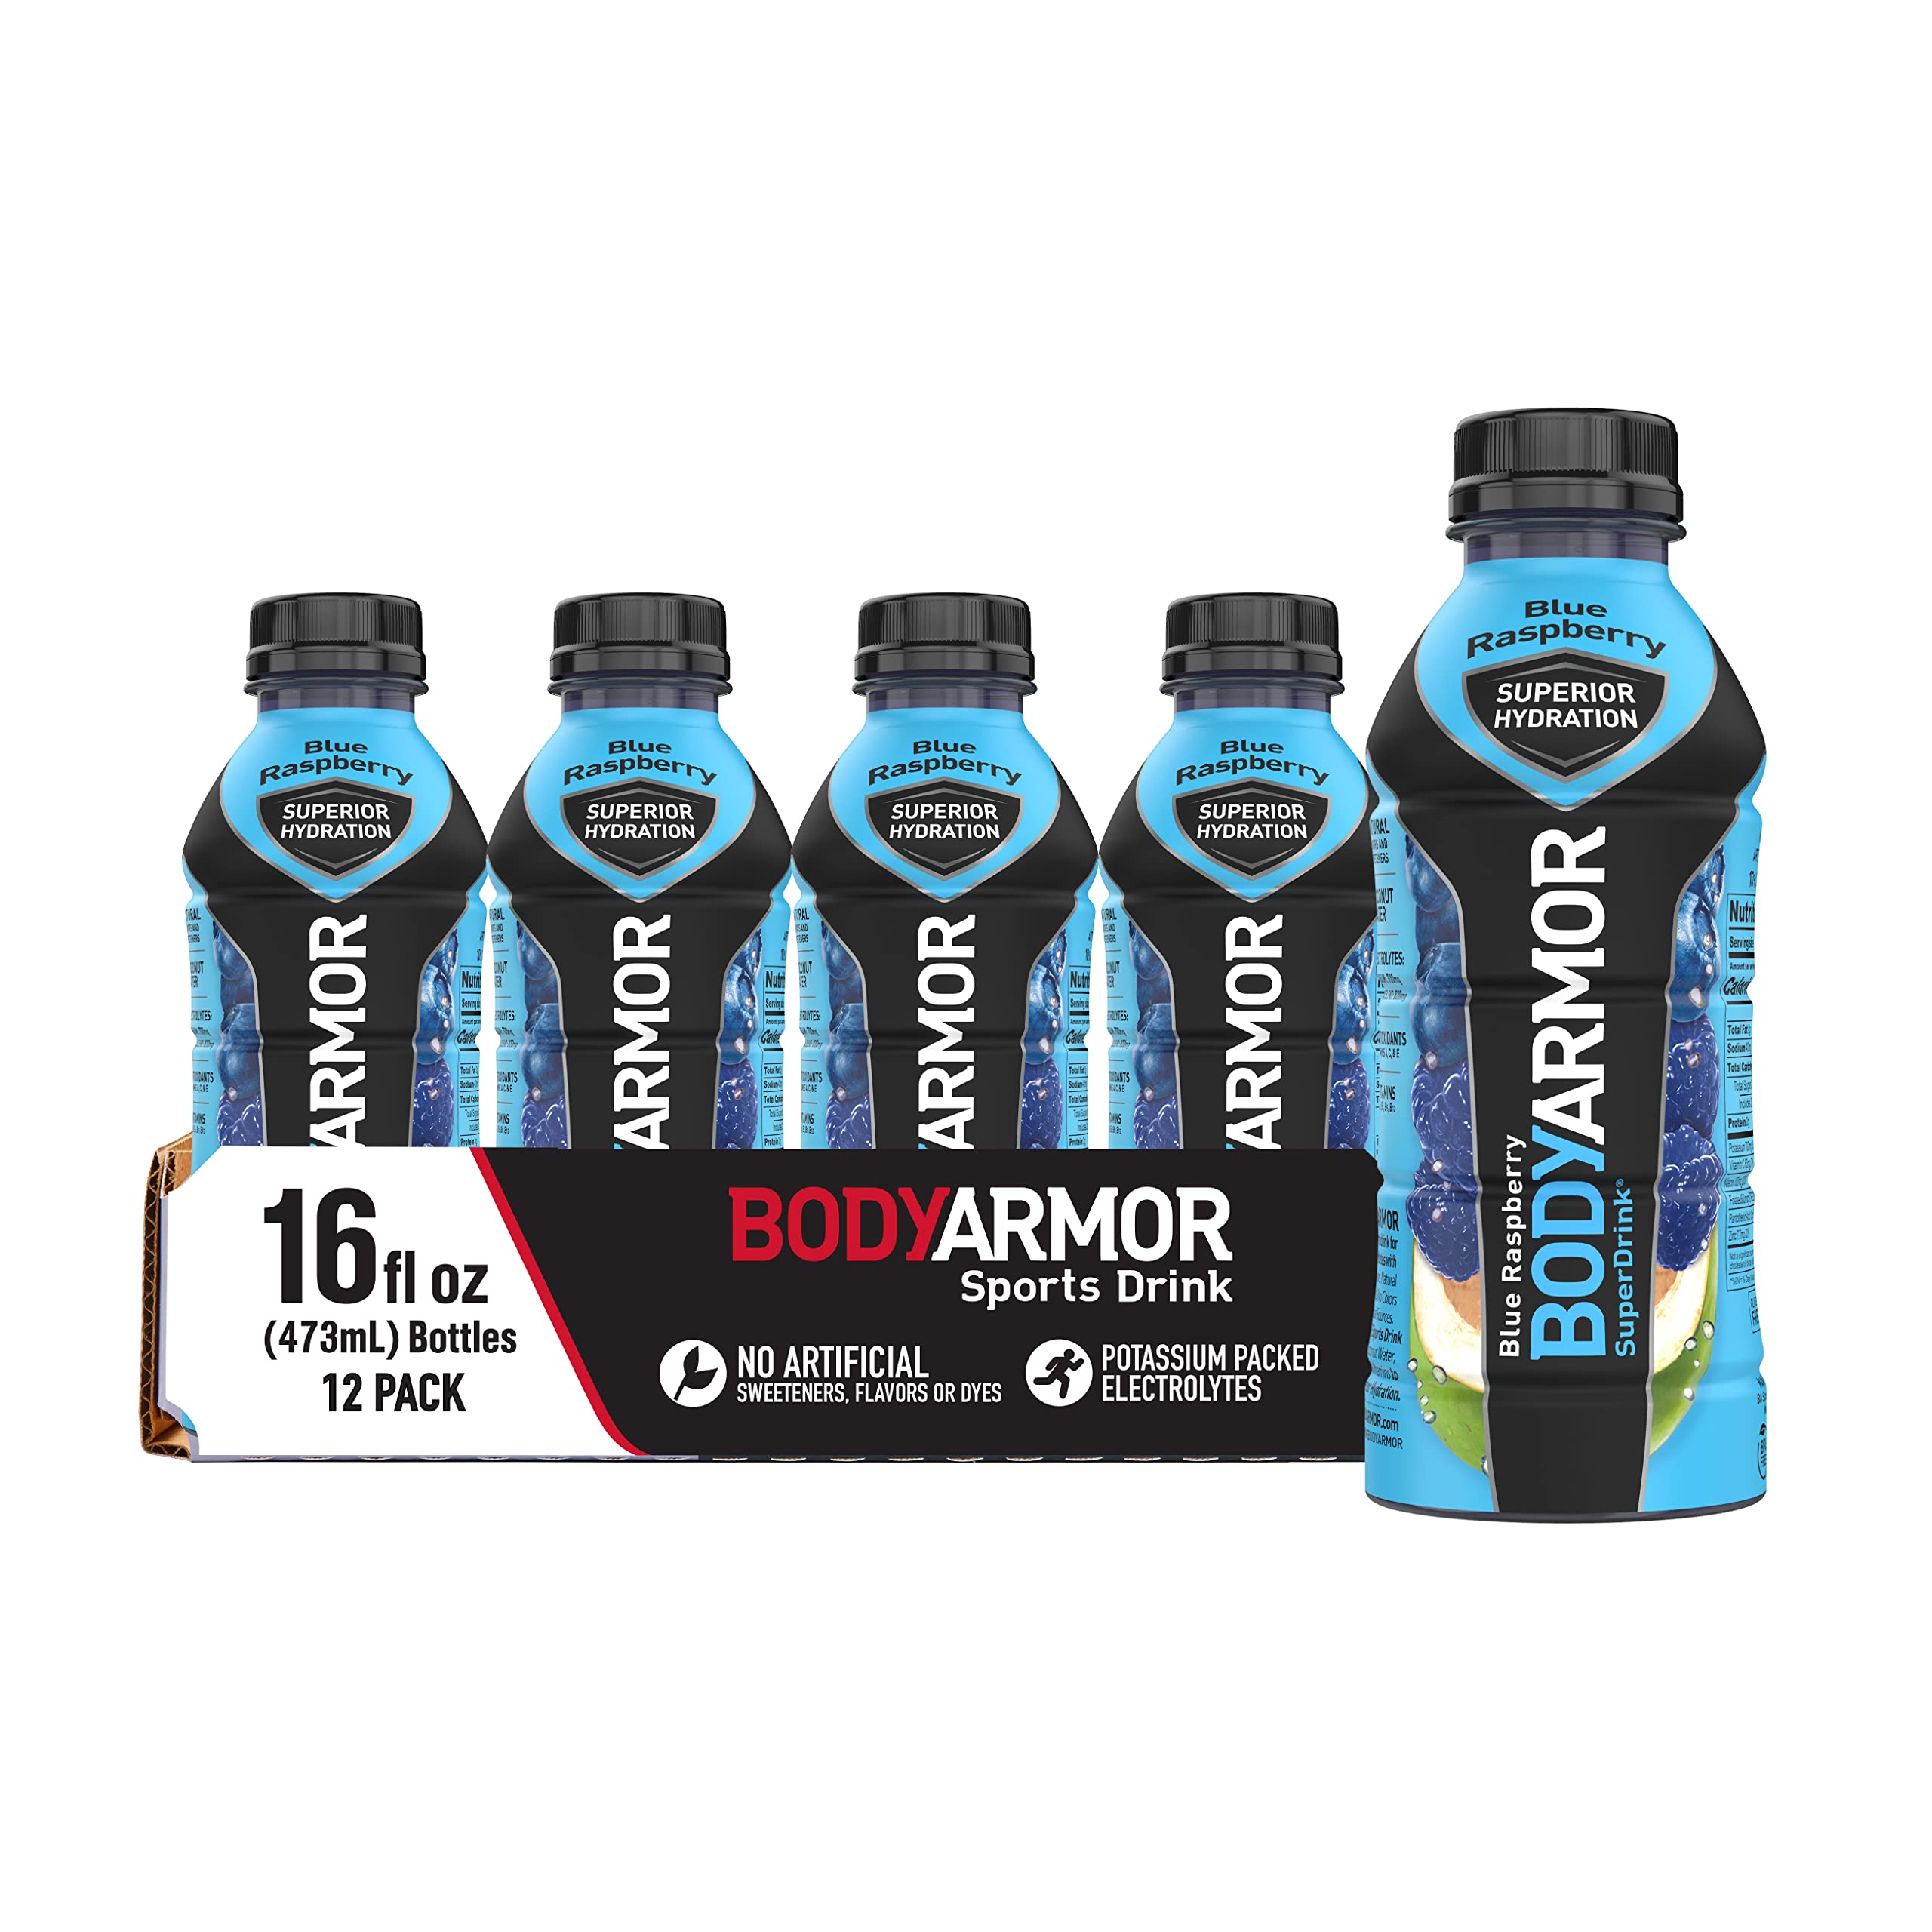 12-Pack 16-Oz BodyArmor Sports Drink (Blue Raspberry) $9.27 ($0.77 each) w/ S&S + Free Shipping w/ Prime or on $25+